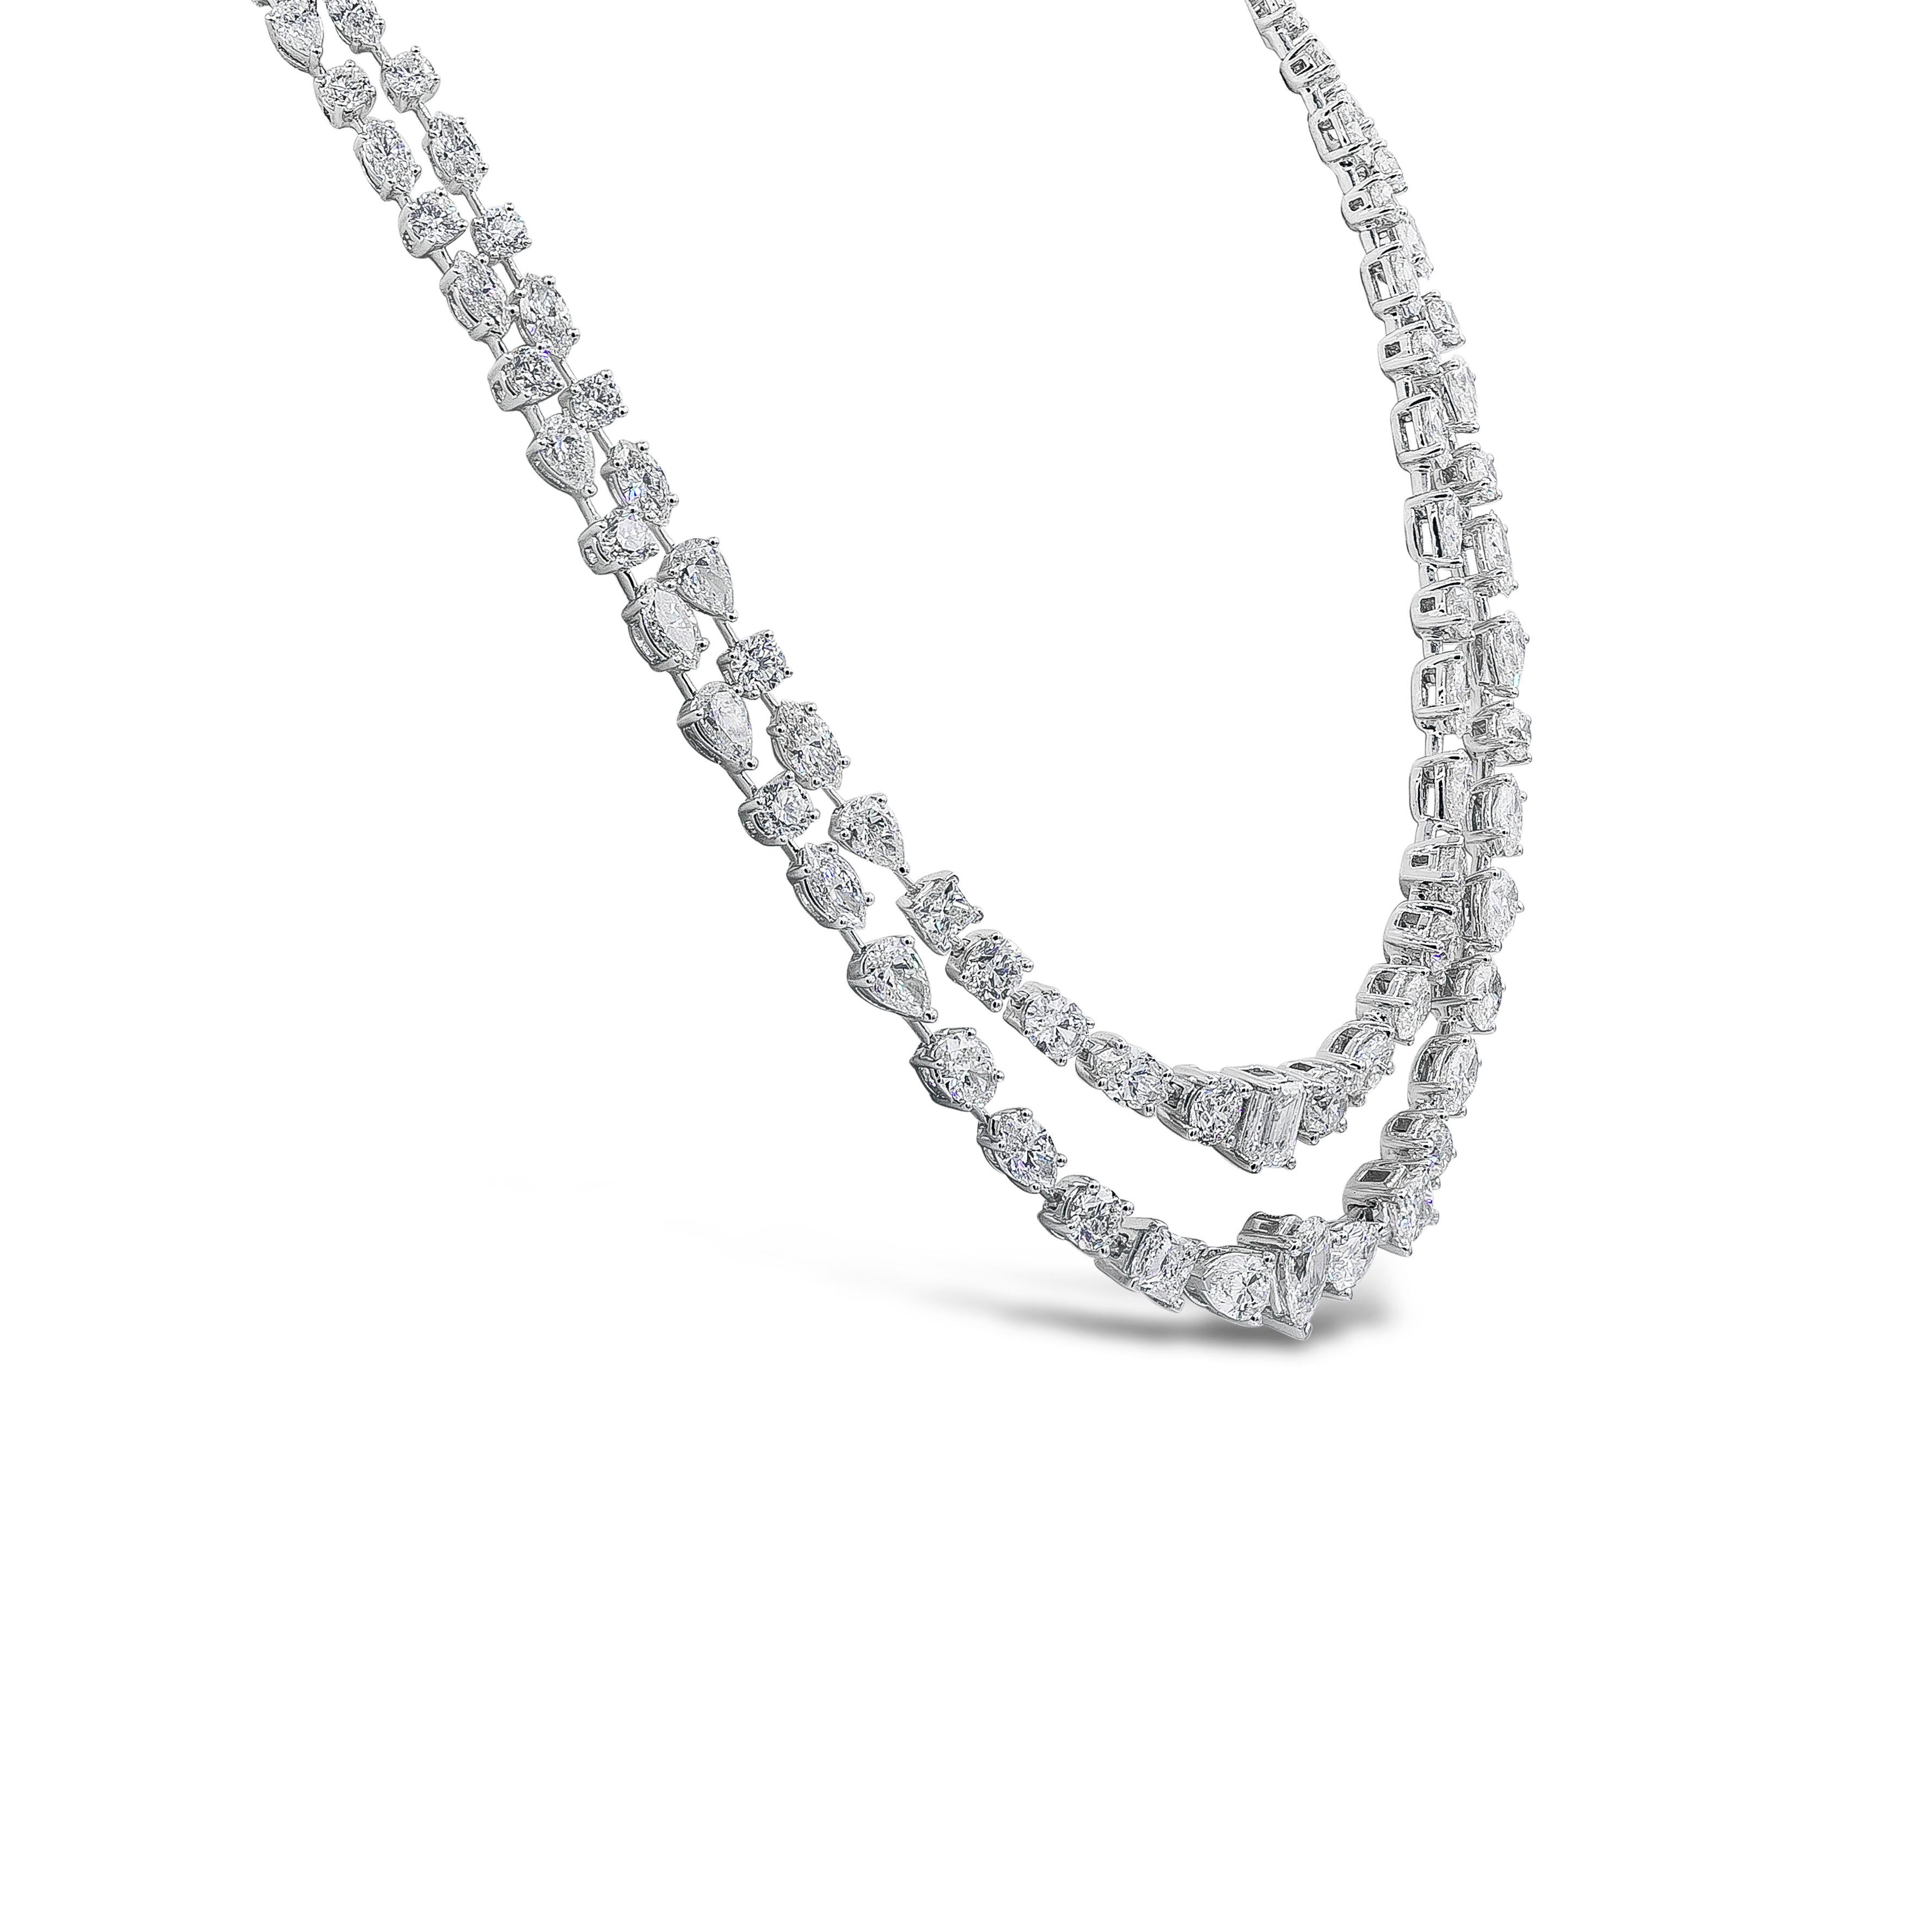 Well crafted high end necklace showcasing 131 pieces of gleaming mixed cut diamonds weighing 36.92 carats total, beautifully set in a magnificent floating design. Set to perfection in 18K white gold. Five diamonds in the necklace are accompanied